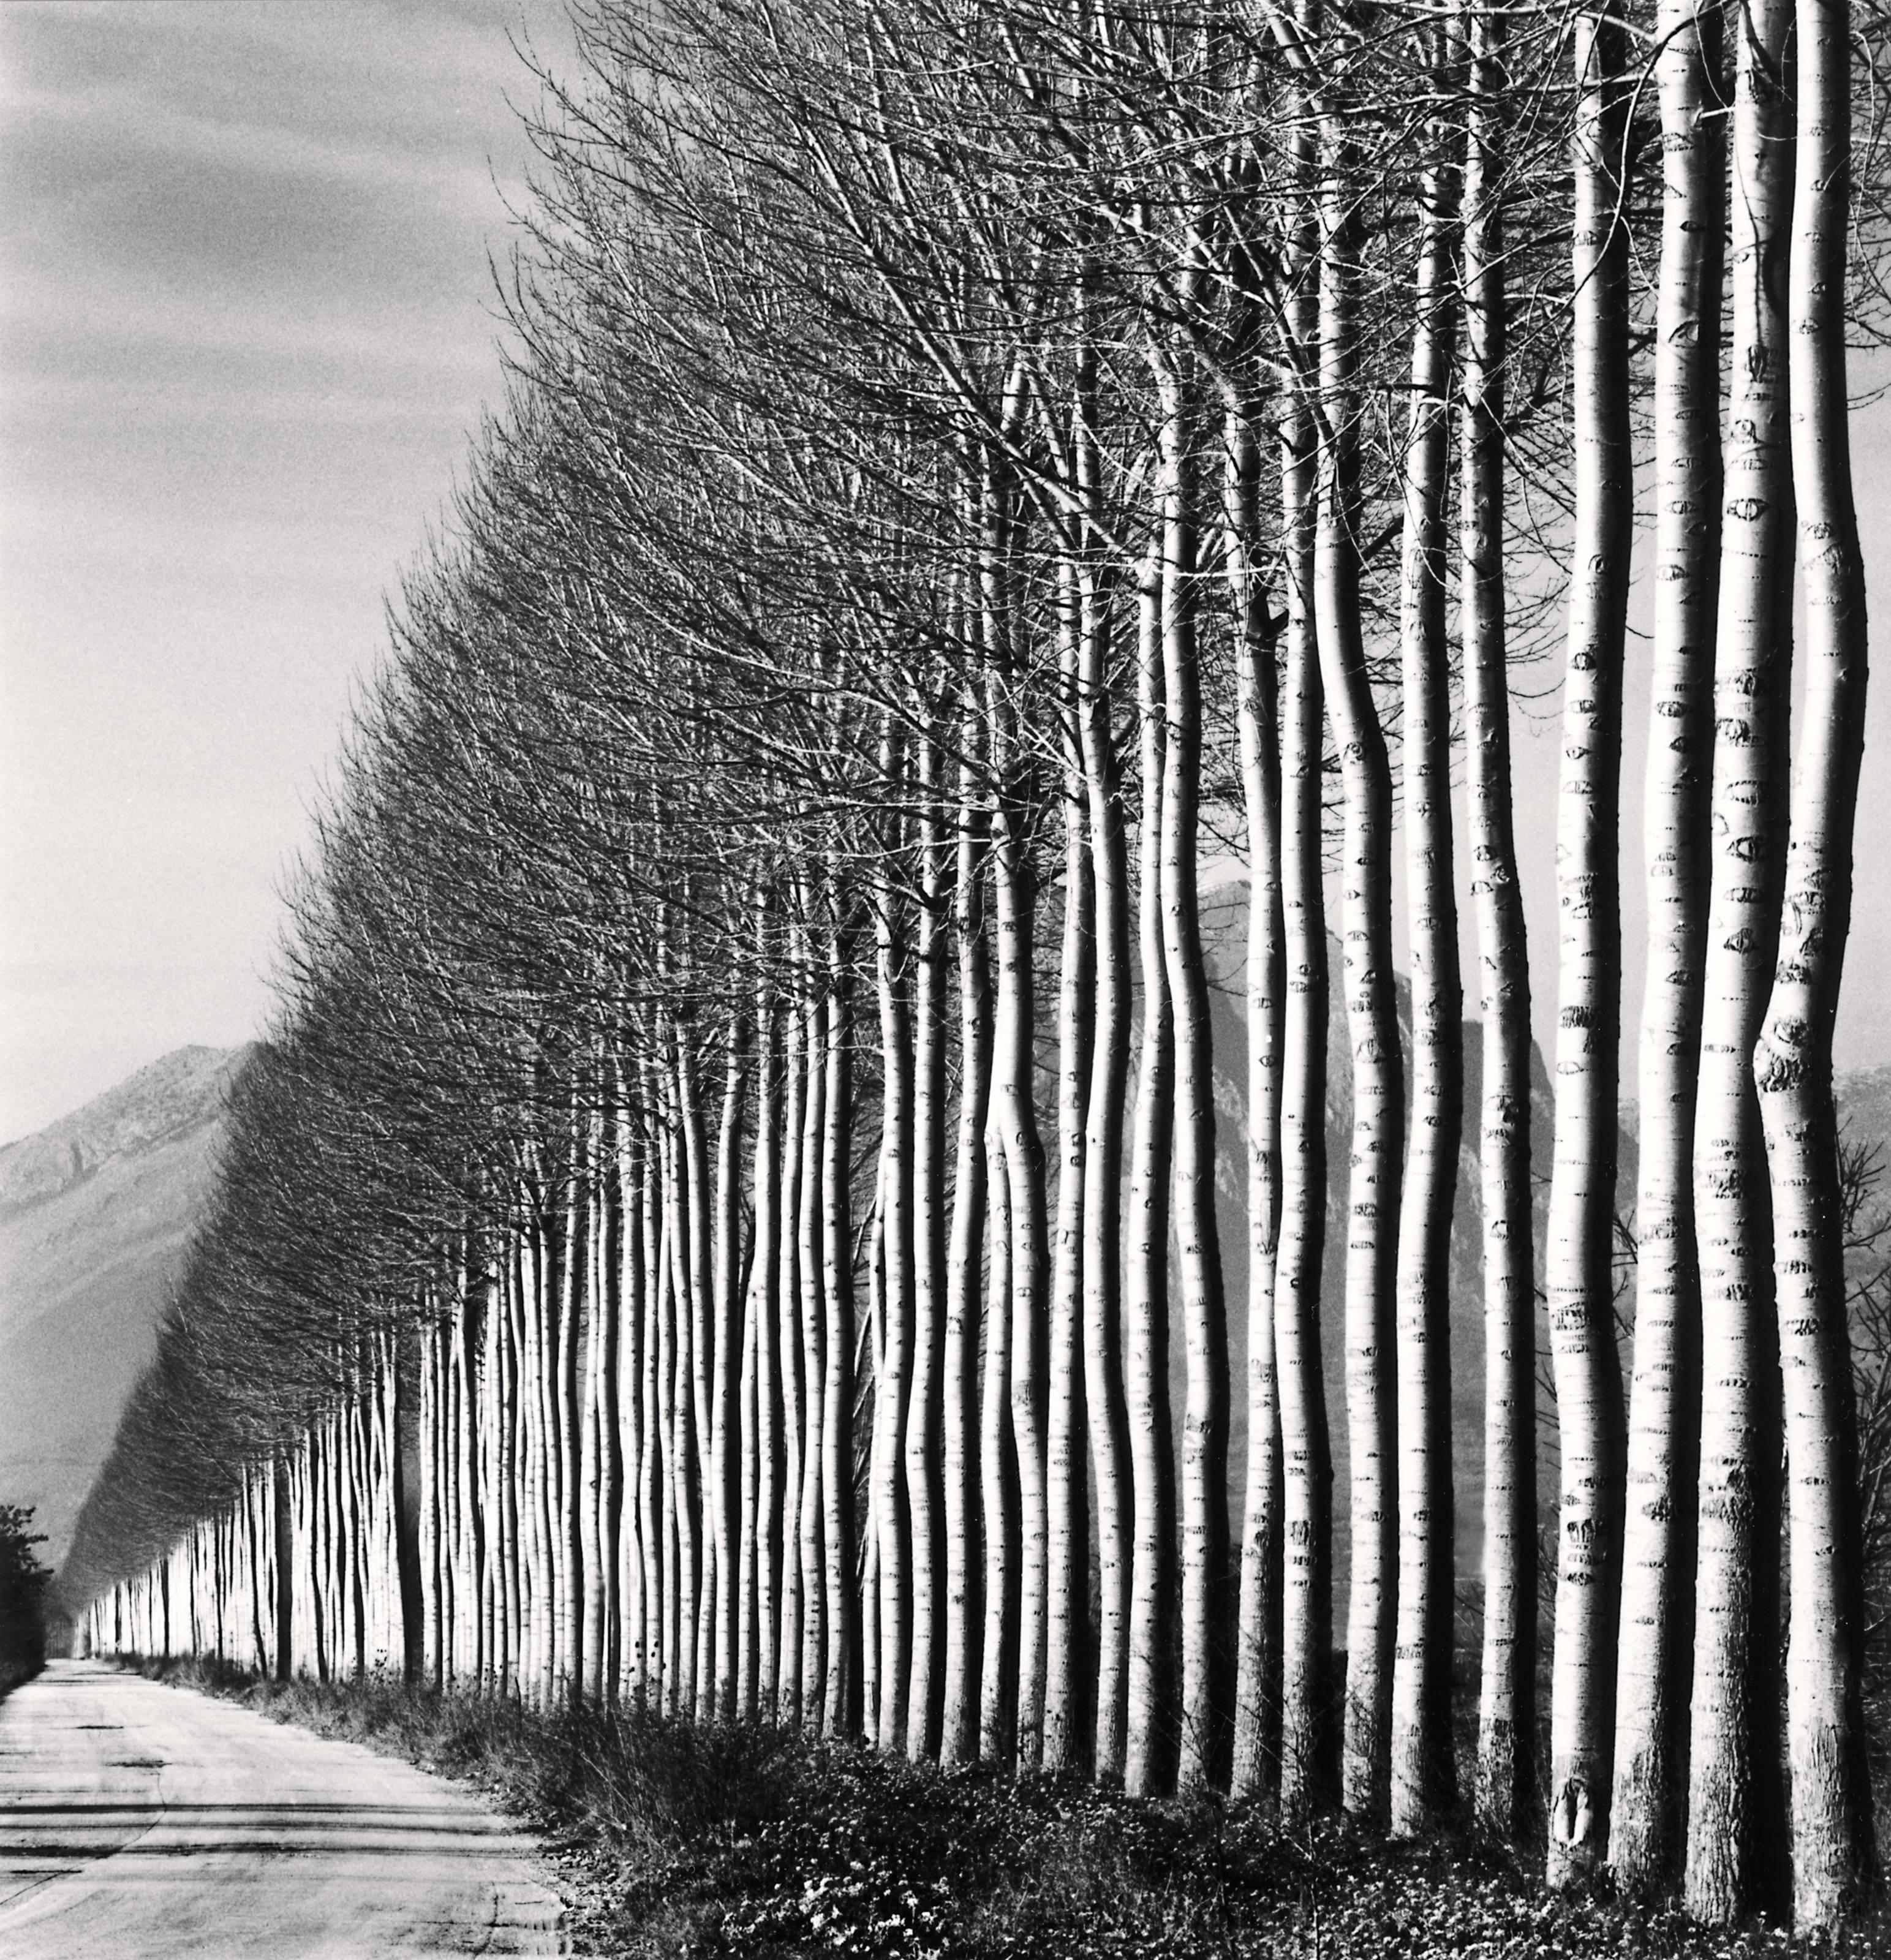 Poplar Trees, Fucino, Abruzzo, Italy, 2016 - Michael Kenna (Black and White)
Signed, dated and numbered on mount
Signed, dated, inscribed with title and stamped with photographer's copyright ink stamp on reverse
Sepia toned silver gelatin print
8